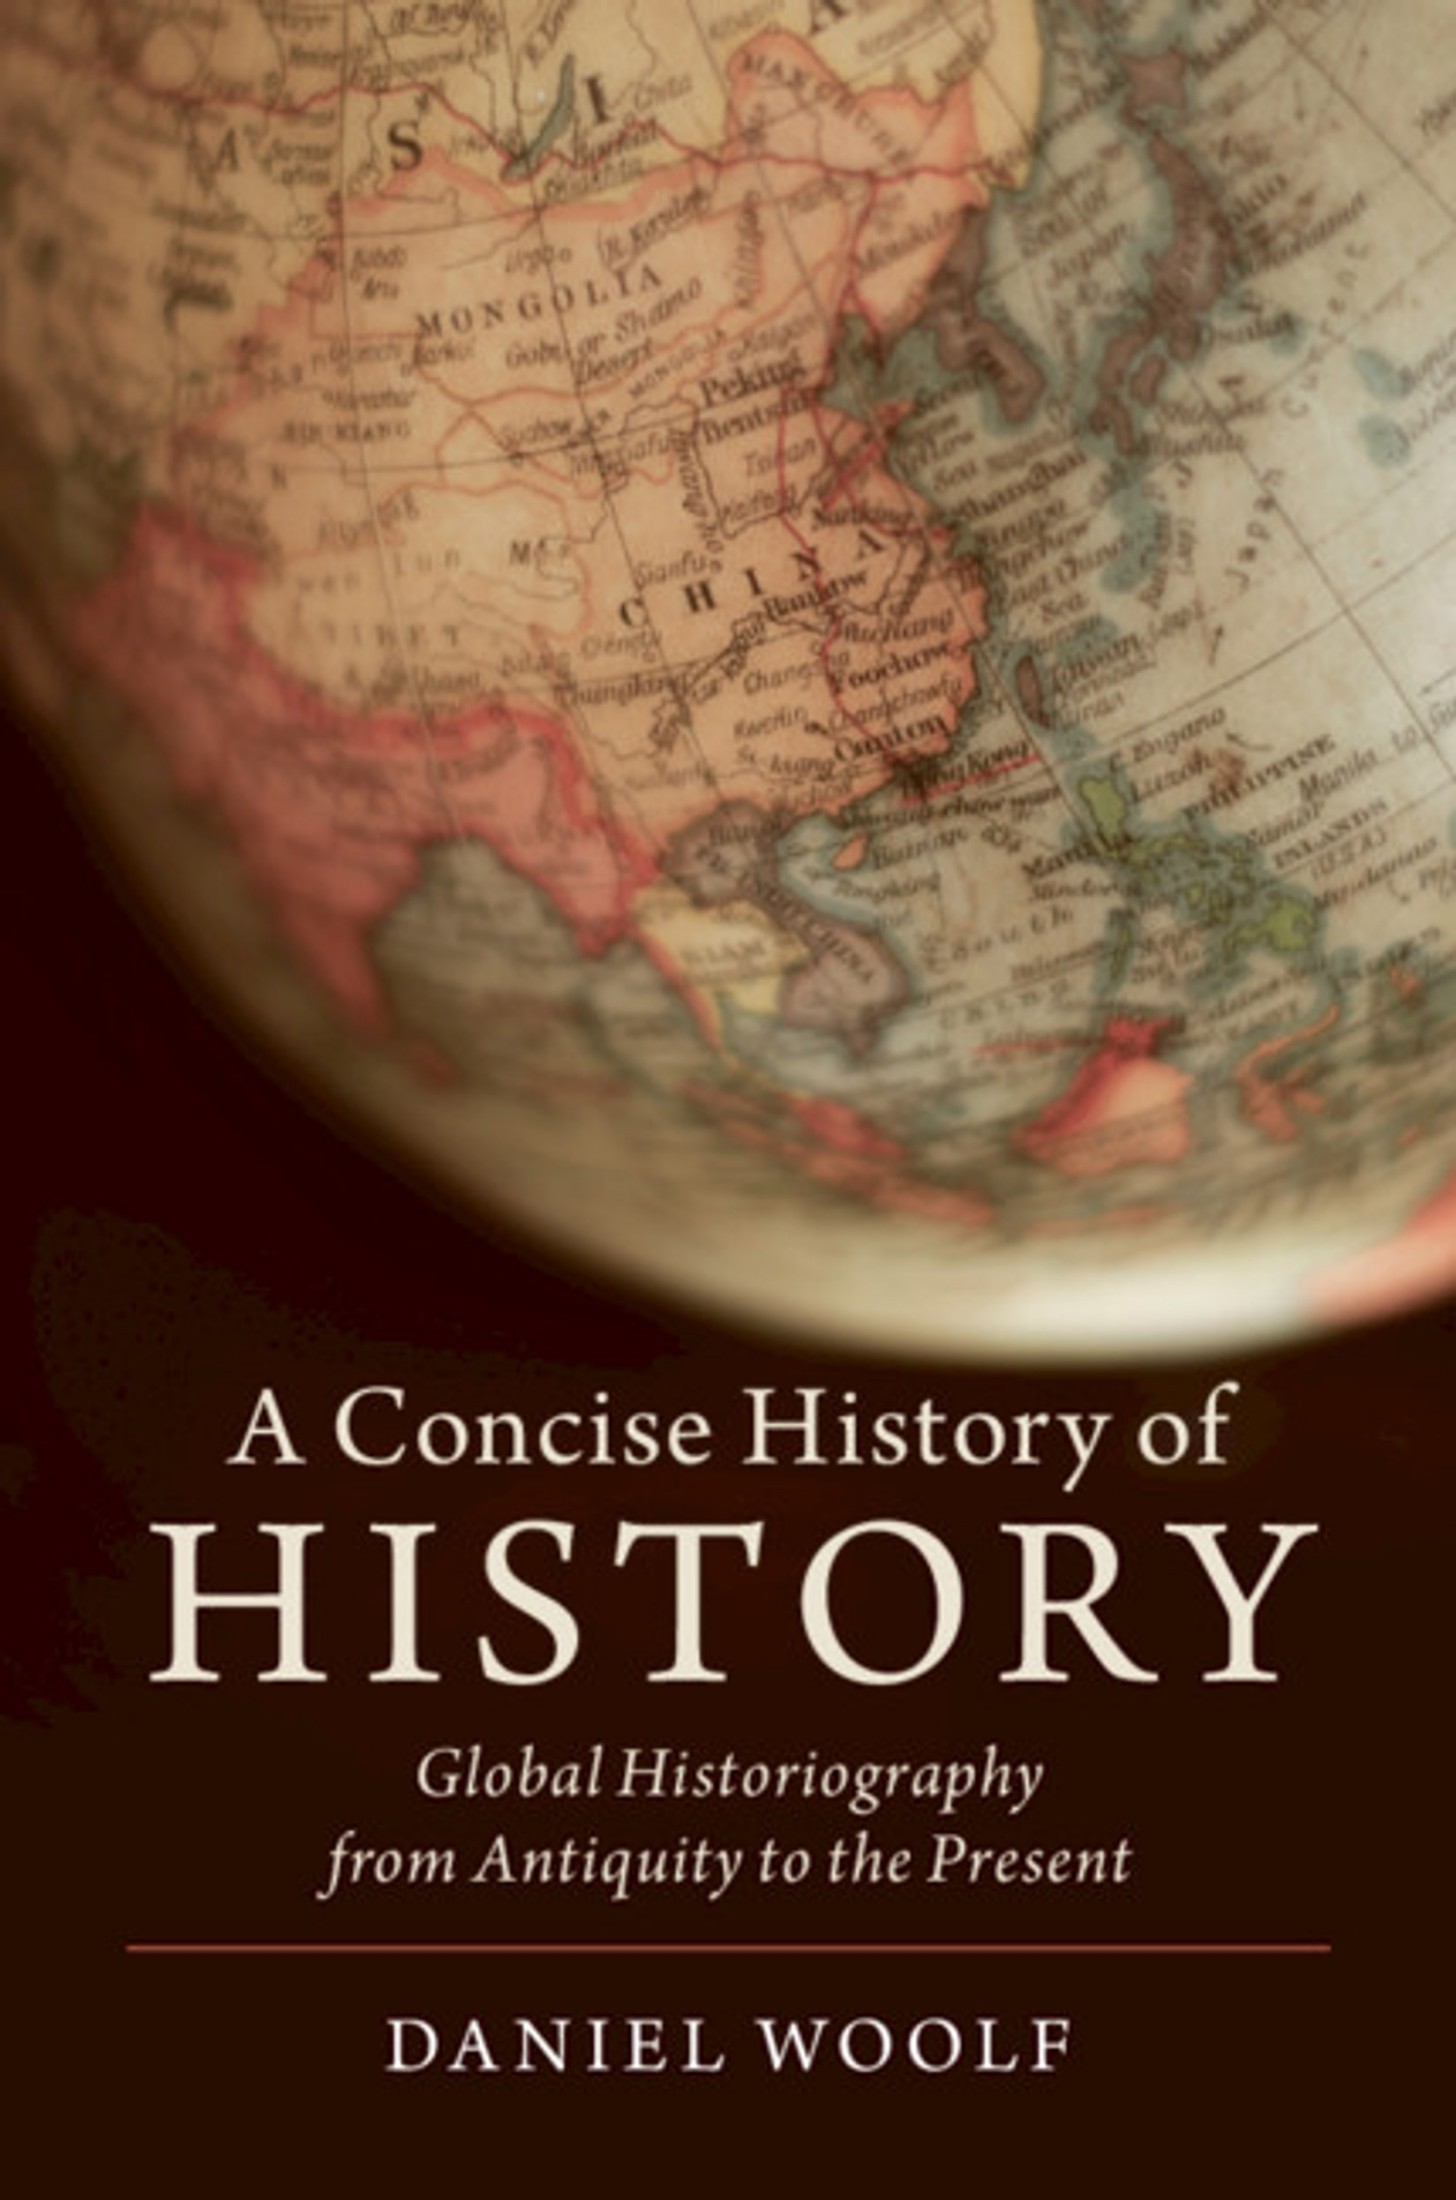 A Concise History of History: Global Historiography From Antiquity to the Present